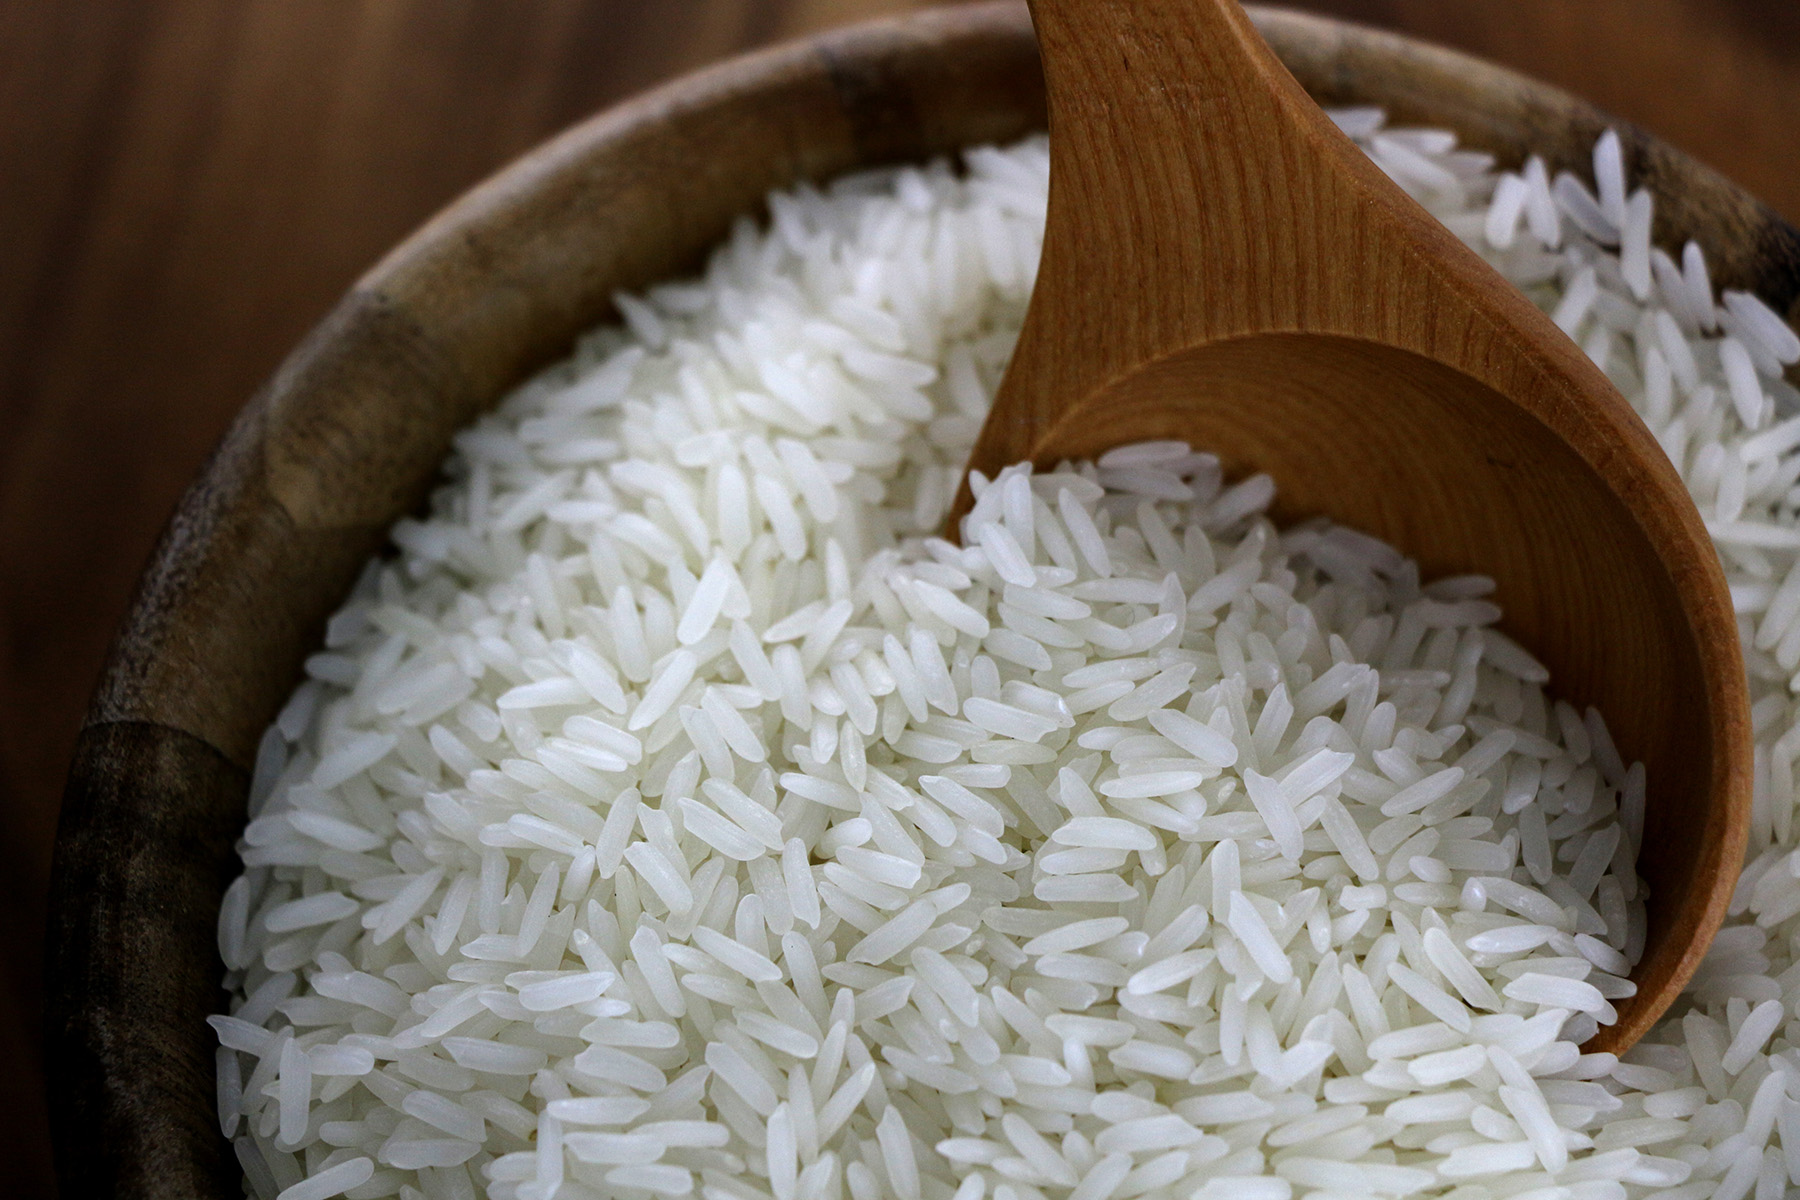 wholesale Basmati Rice Price - Nutex Basmati Rice - Supplier & Exporter of Indian Quality Rice